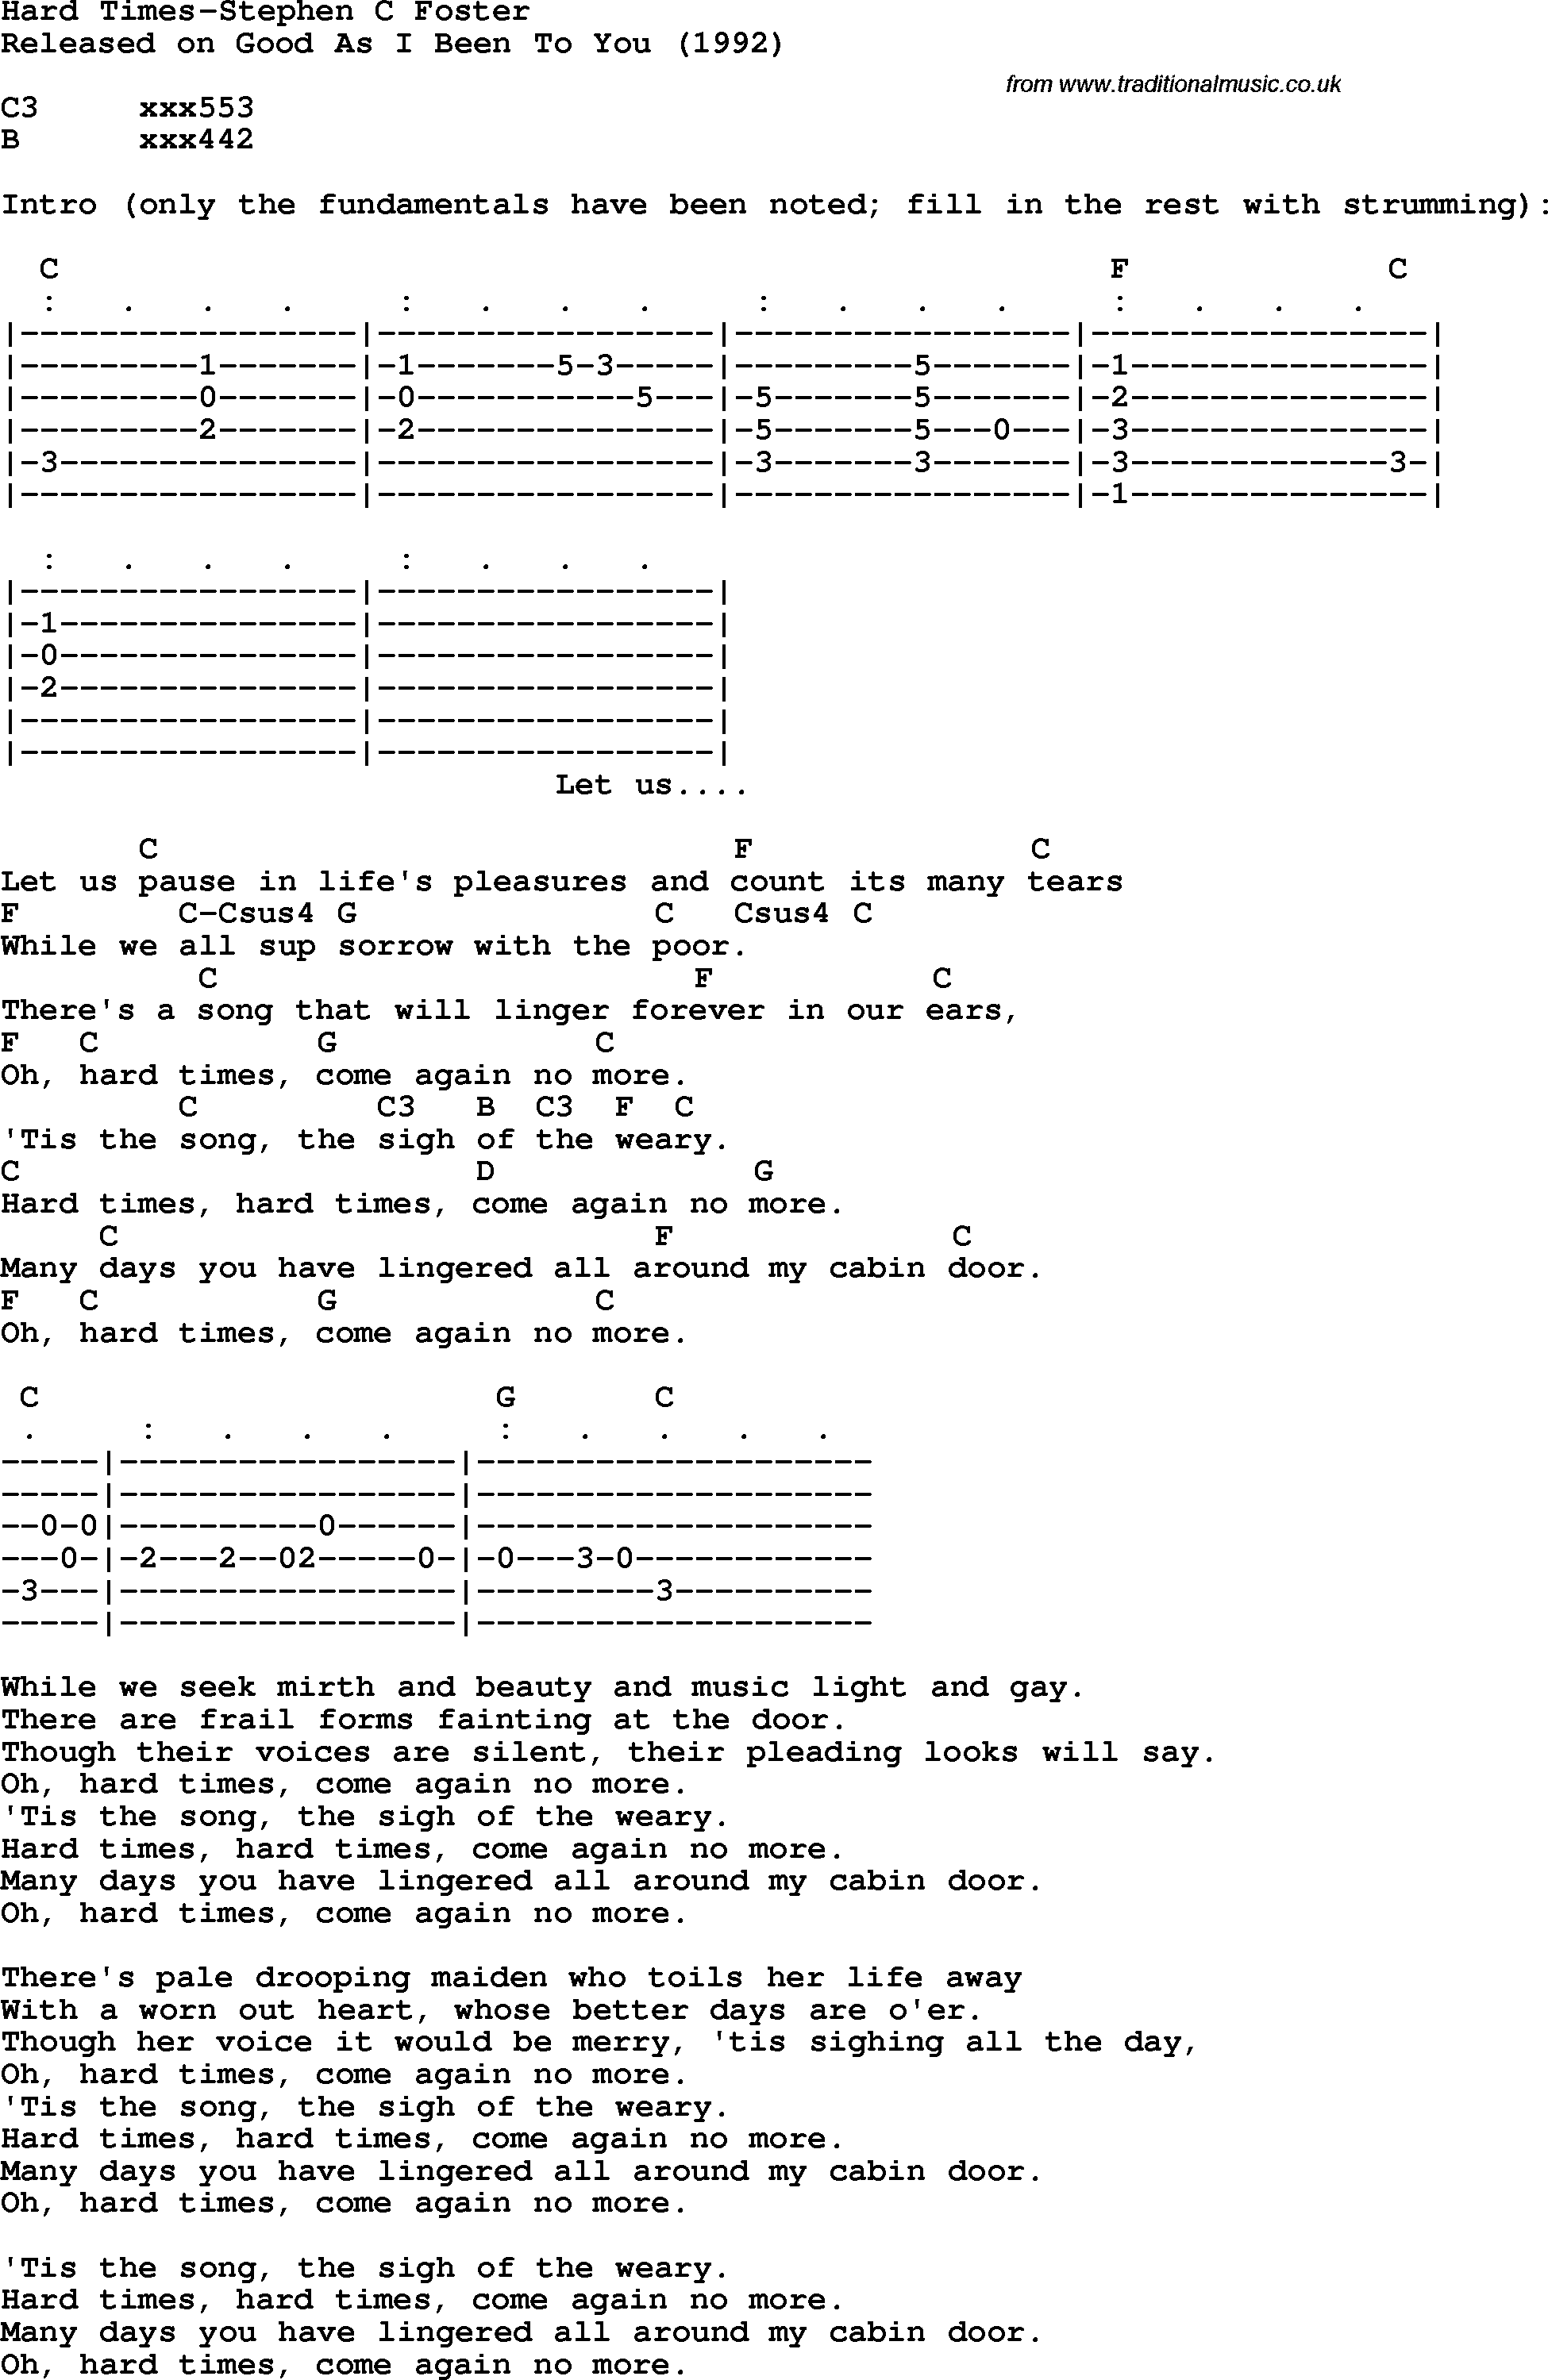 Protest Song Hard Times-Stephen C Foster lyrics and chords